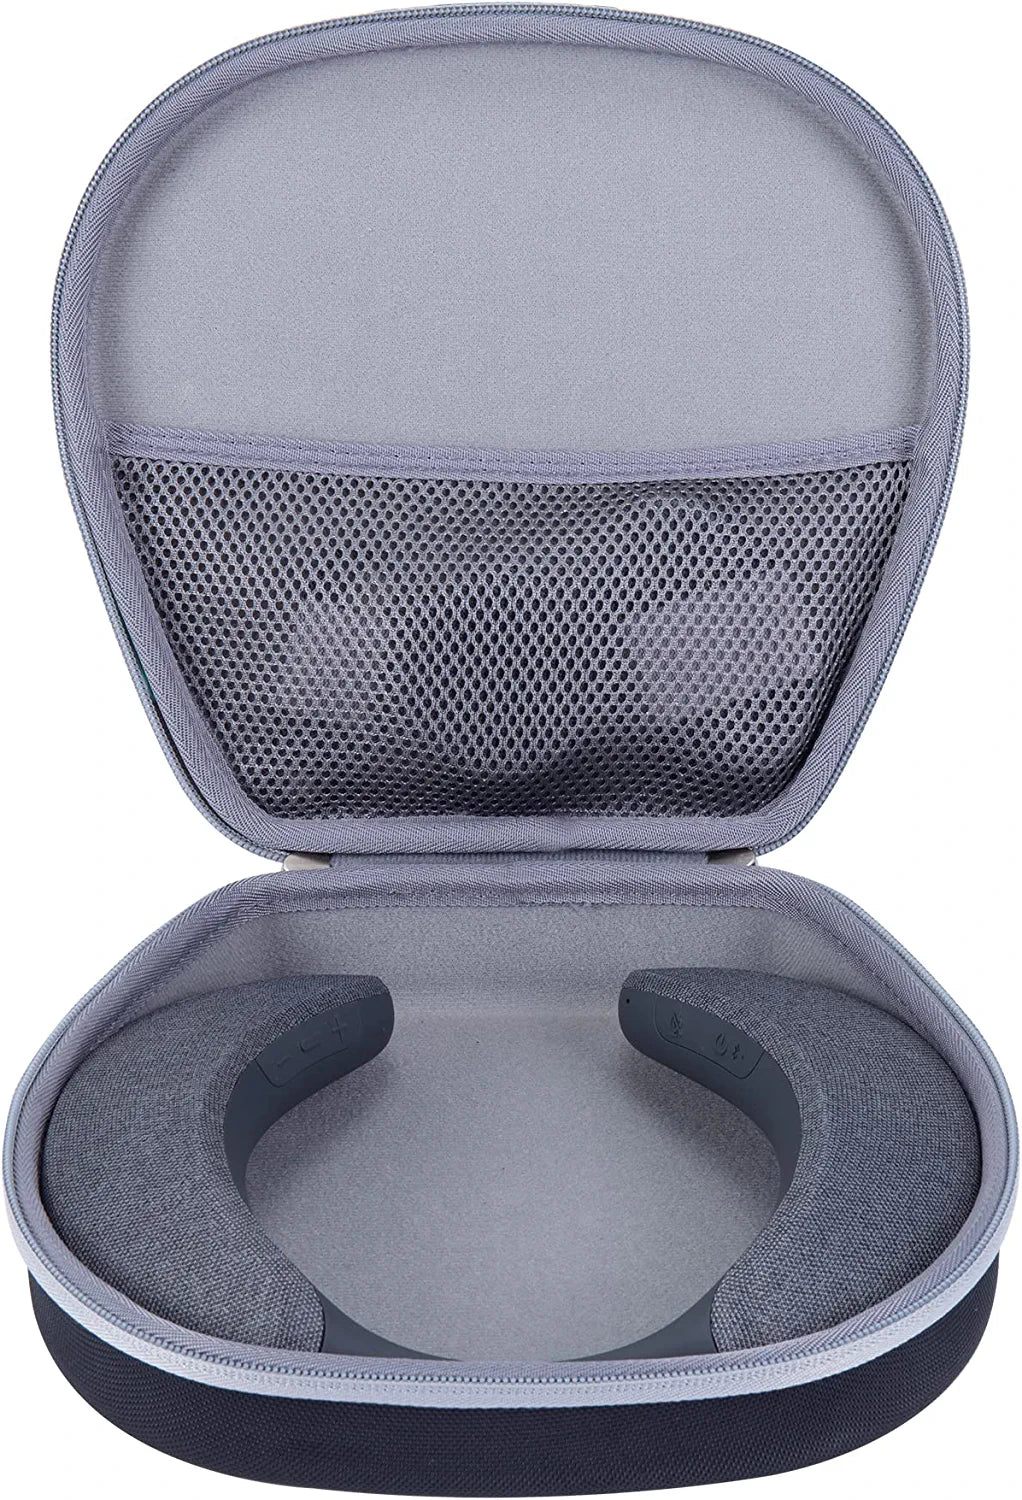 Hard Carrying Case Replacement for Sony SRS-NS7 Wireless Neckband Bluetooth Speaker, Case Only